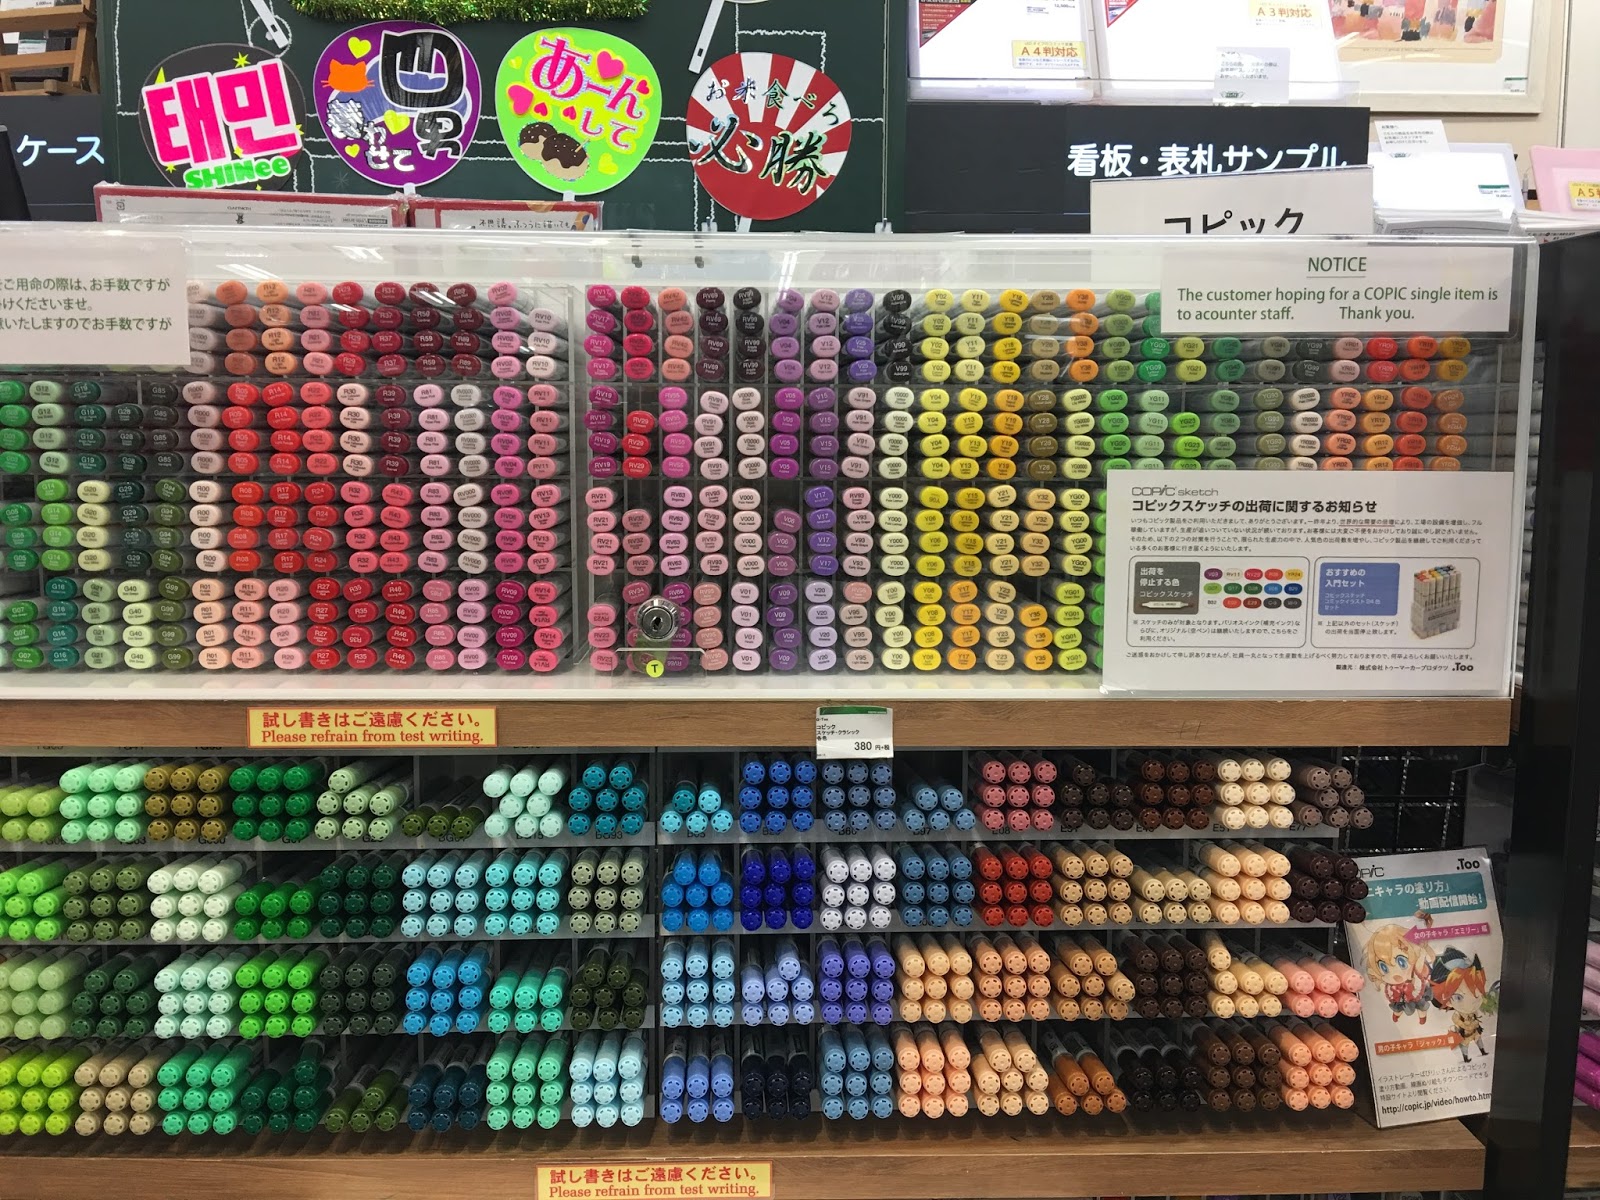 Ultimate Guide to Copic marker shopping in Tokyo, Japan